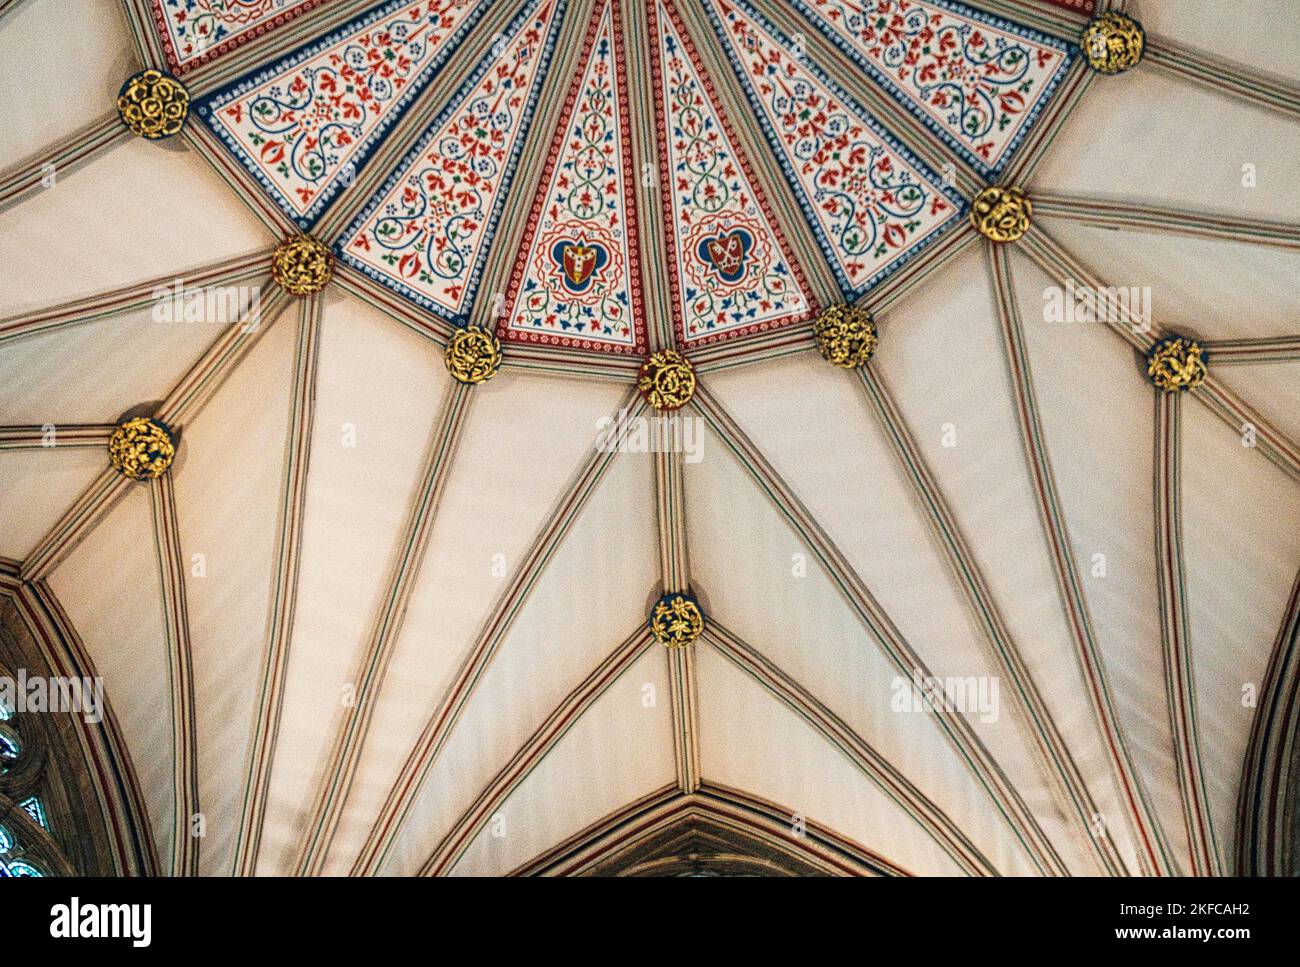 Fan - soffitto a volta della Chapter House, York Minster, North Yorkshire, Inghilterra Foto Stock